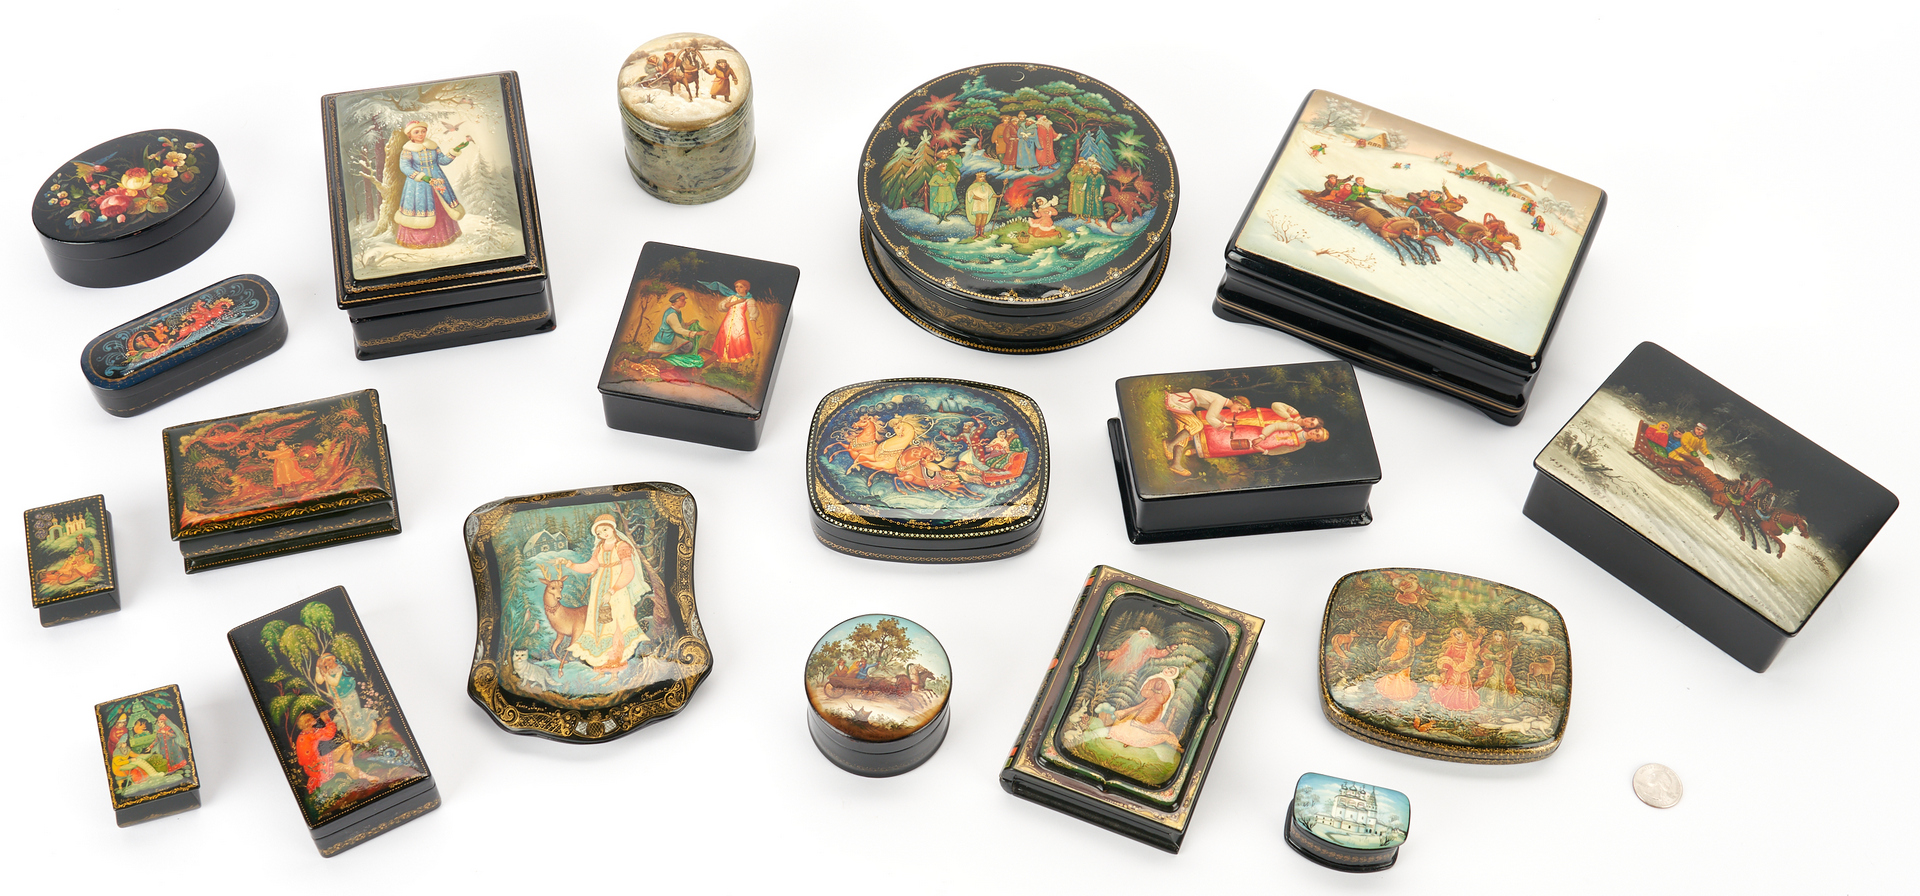 Lot 336: 19 Russian Lacquer Boxes, incl. Father Frost Scenes